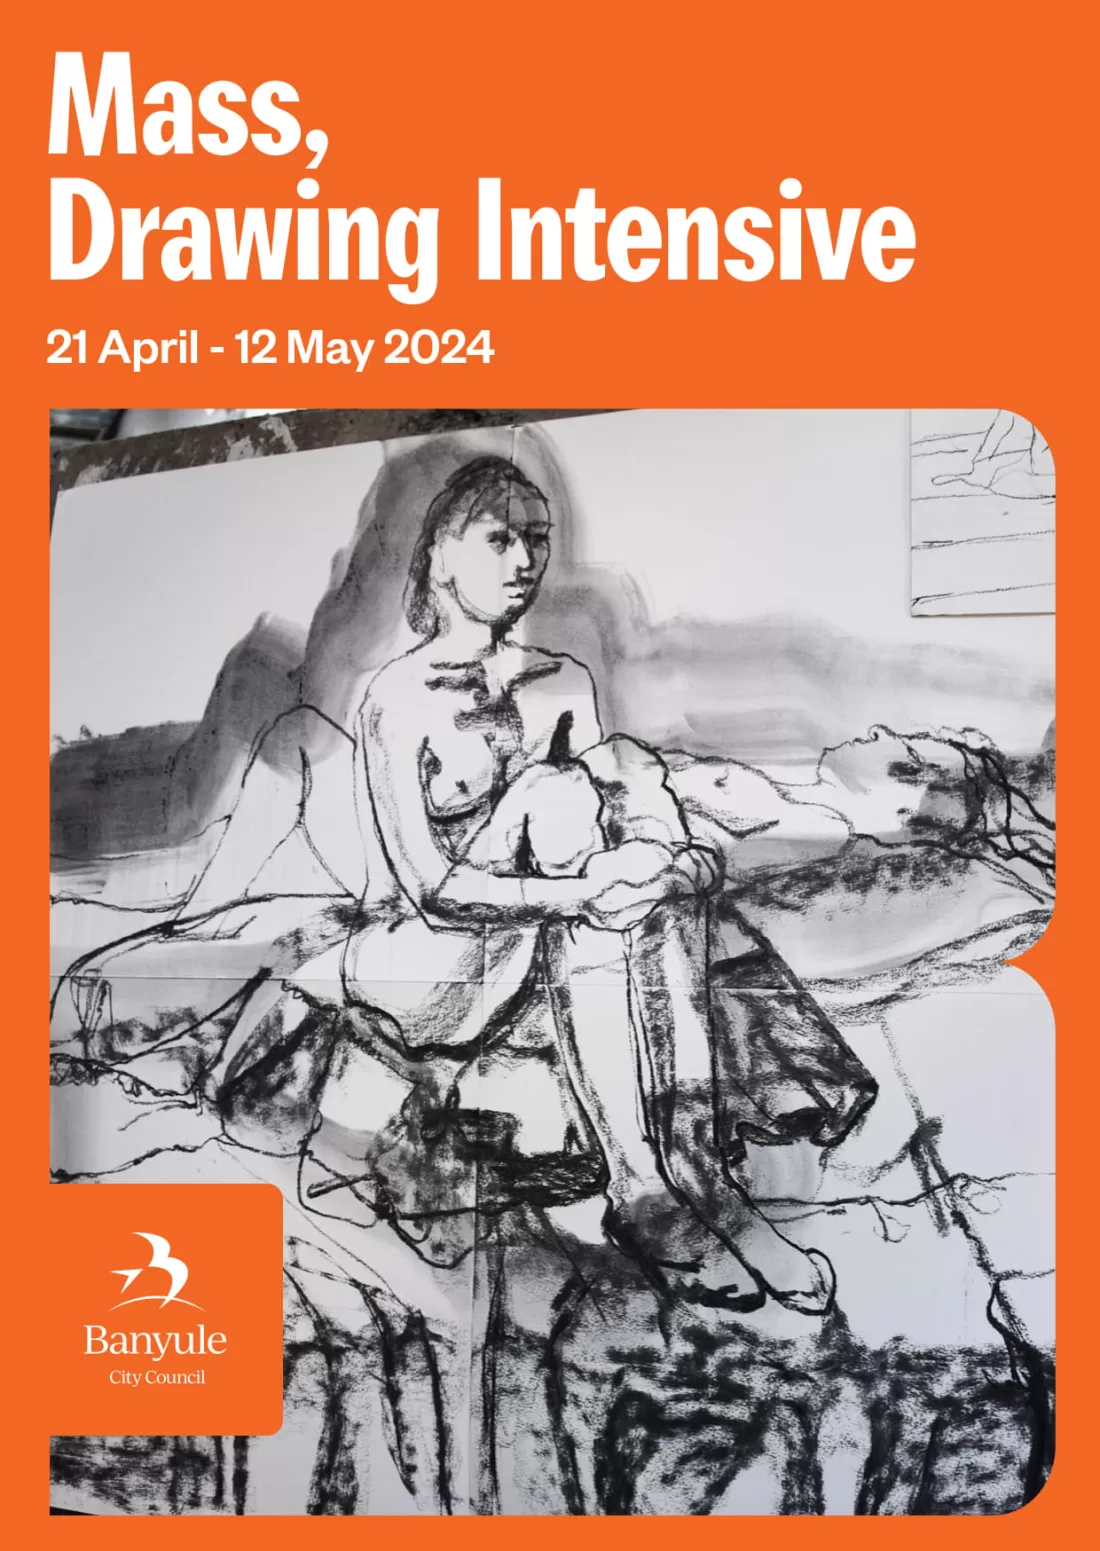 Mass Drawing Intensive exhibition